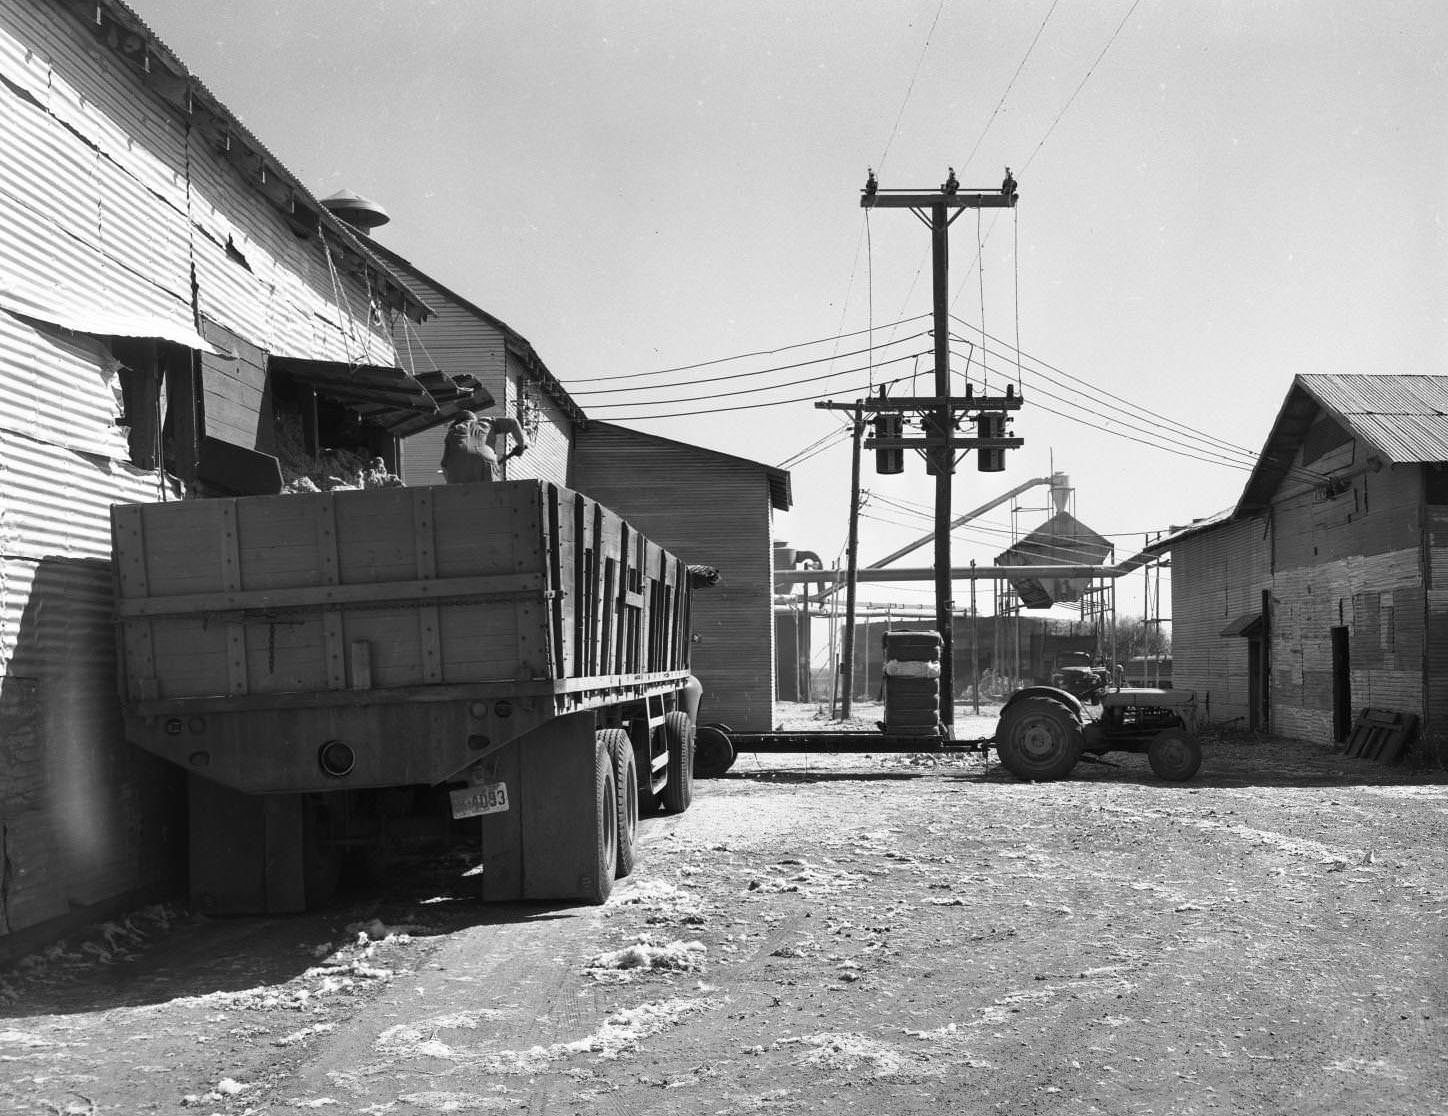 A cotton gin, 1958. There is a truck and trailer being loaded with cotton by a man. There are several buildings and machines with a tractor and power lines between them.